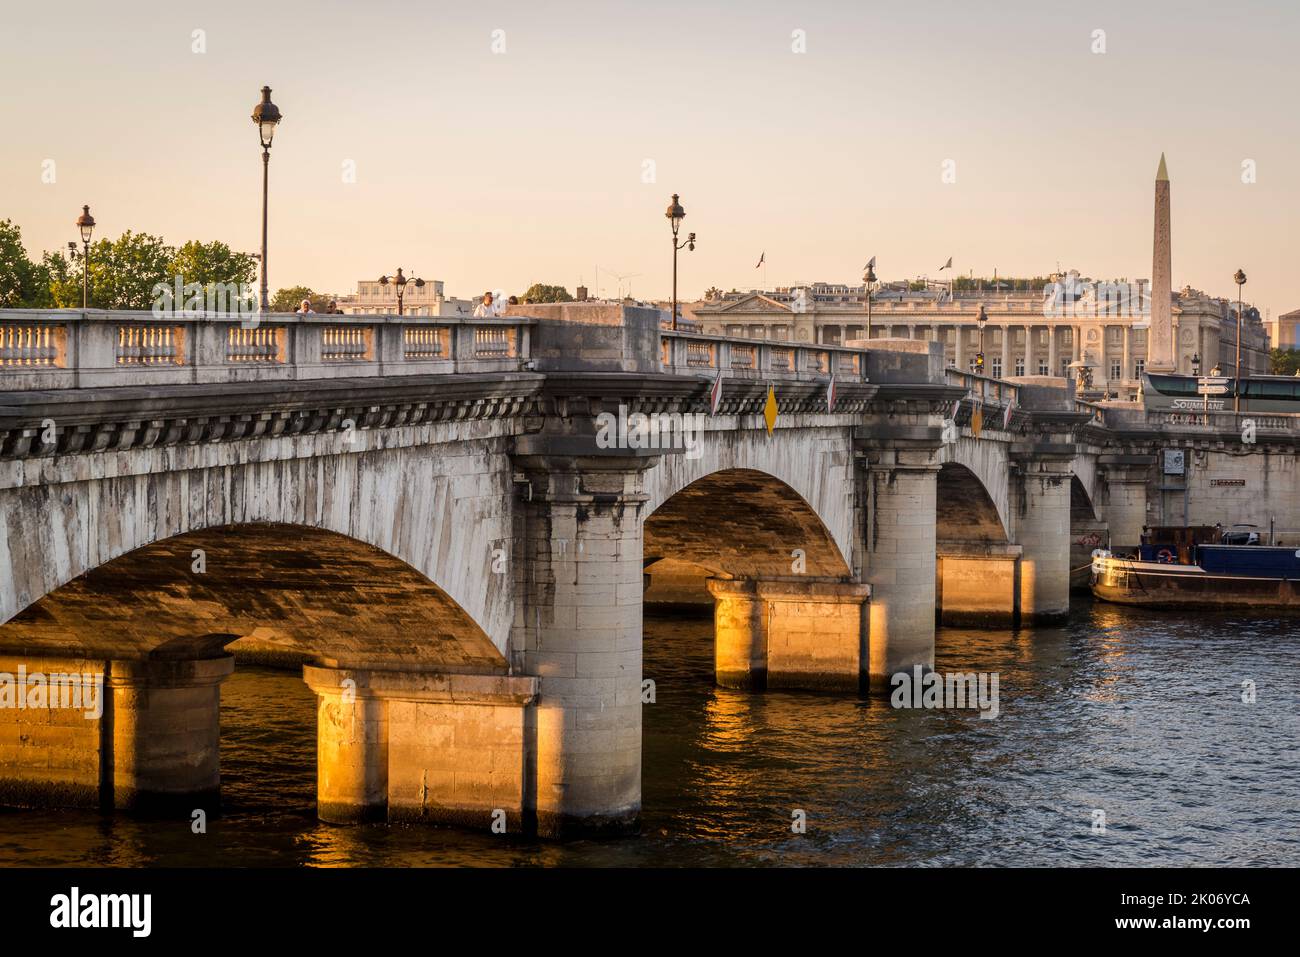 Pont de la Concorde, Stalwart 1791 arch bridge constructed during the French Revolution with stones from the Bastille. Paris, France Stock Photo